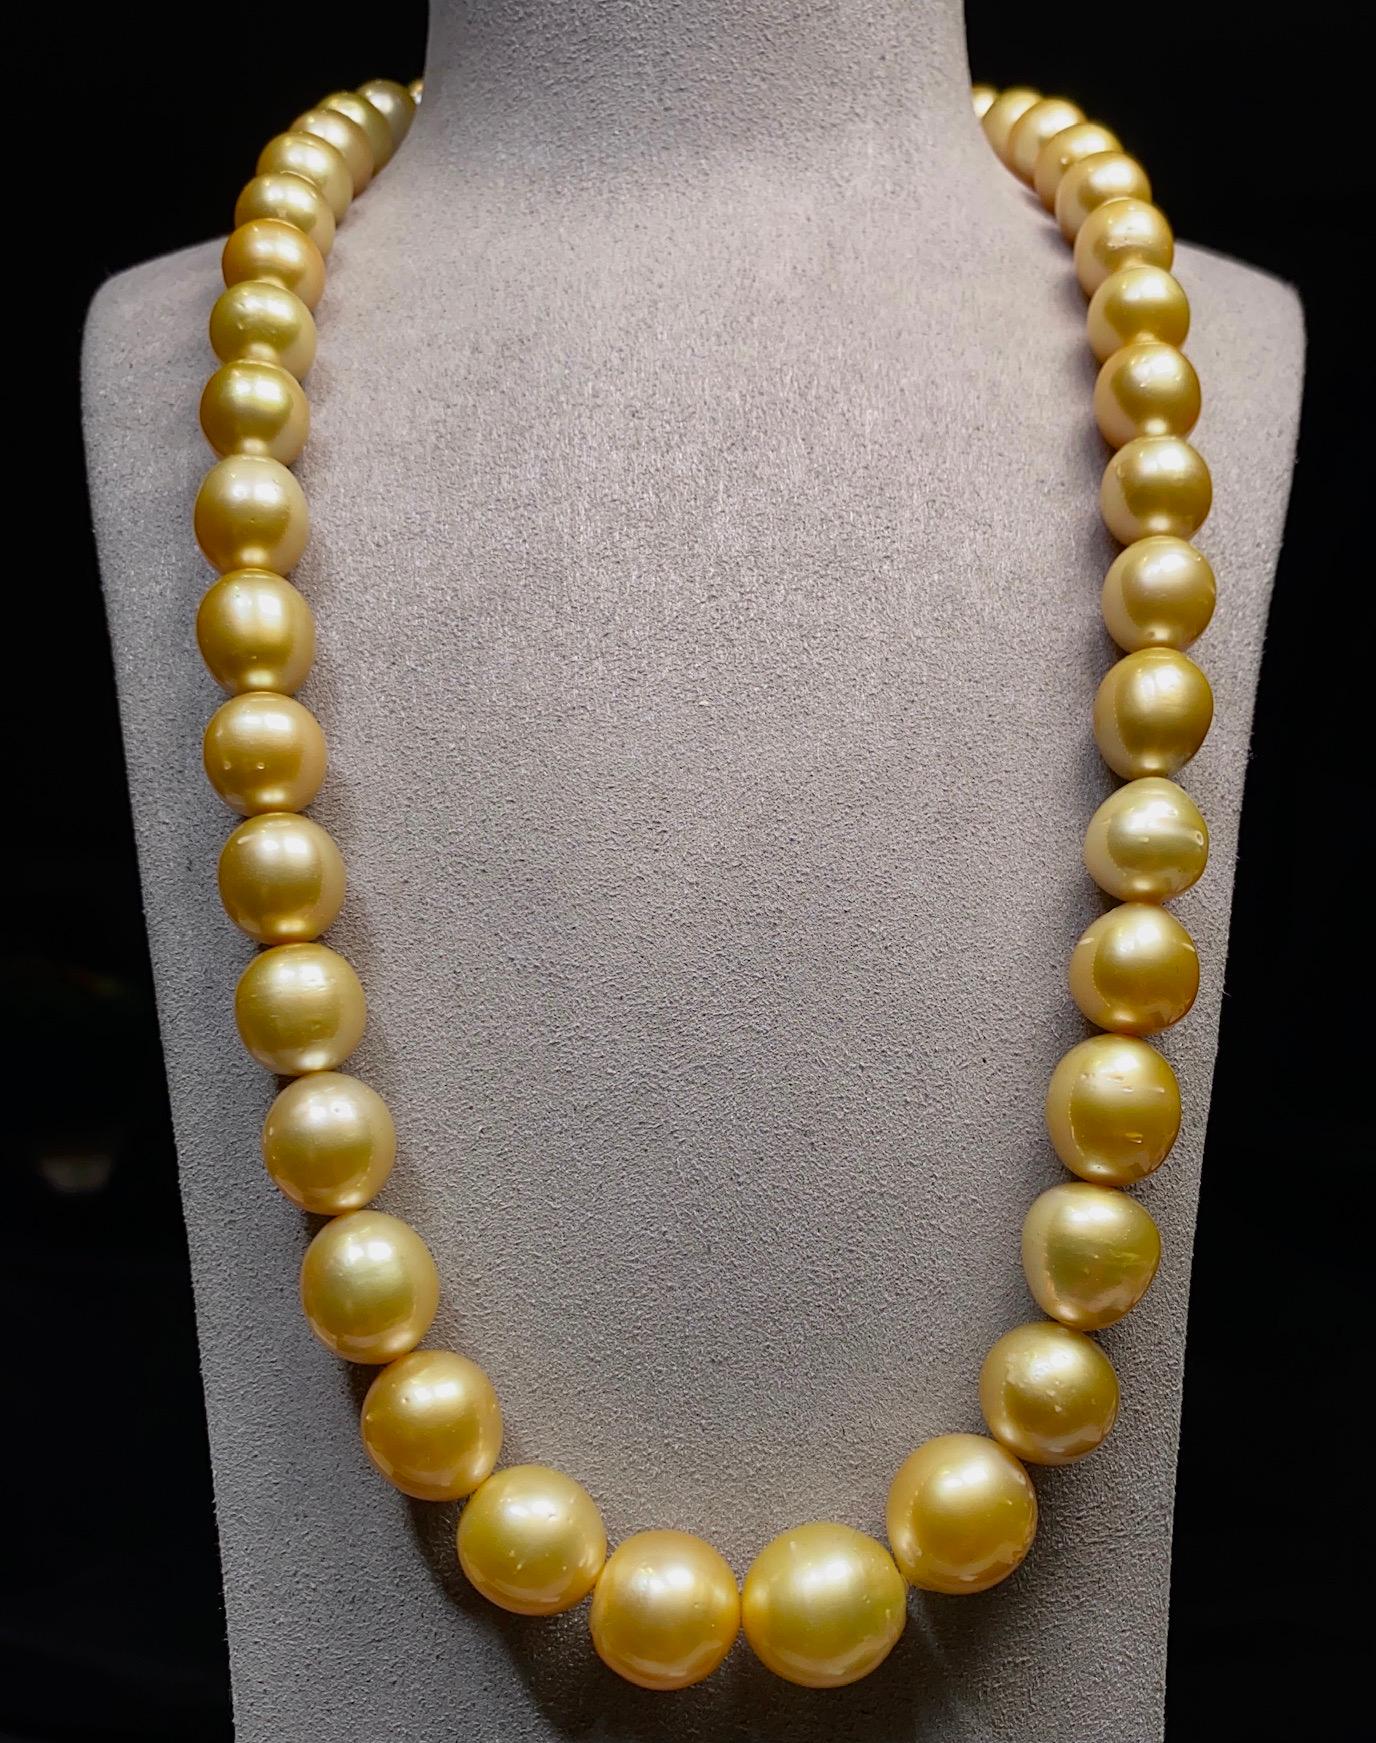 A Strand of Golden South Sea Pearl Necklace with 18K Gold Clasp. The pearls are of yellow golden colour with Green Overtone. This is a big necklace as the largest pearl measuring 16mm.

The Golden South Sea Pearls are measuring from 12.1 mm to 16 mm